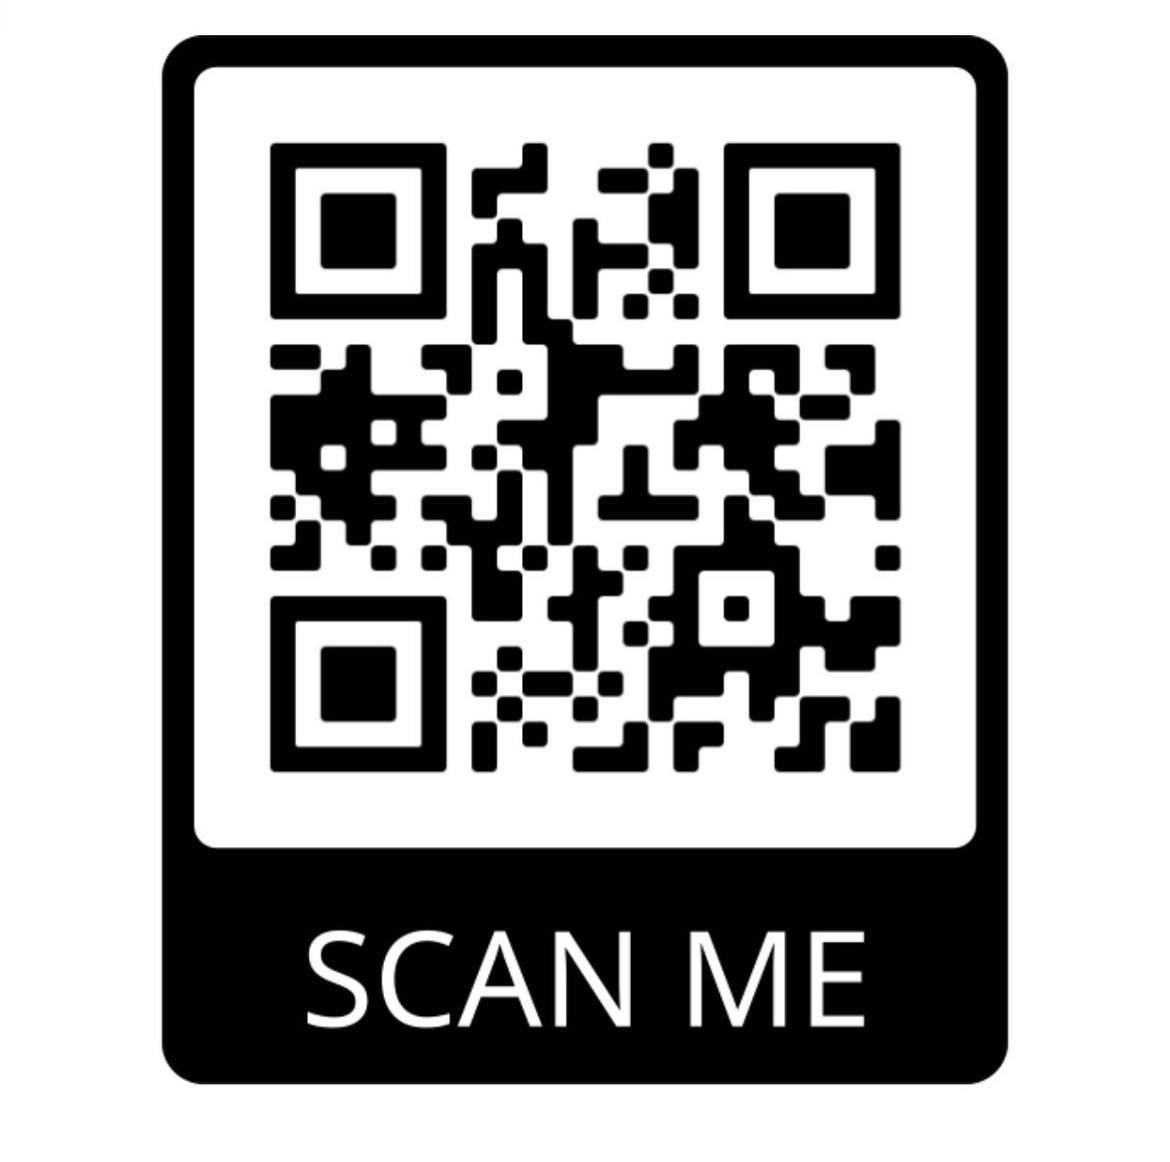 Scan this QR code for information on how to donate to the Four Hearts Foundation.